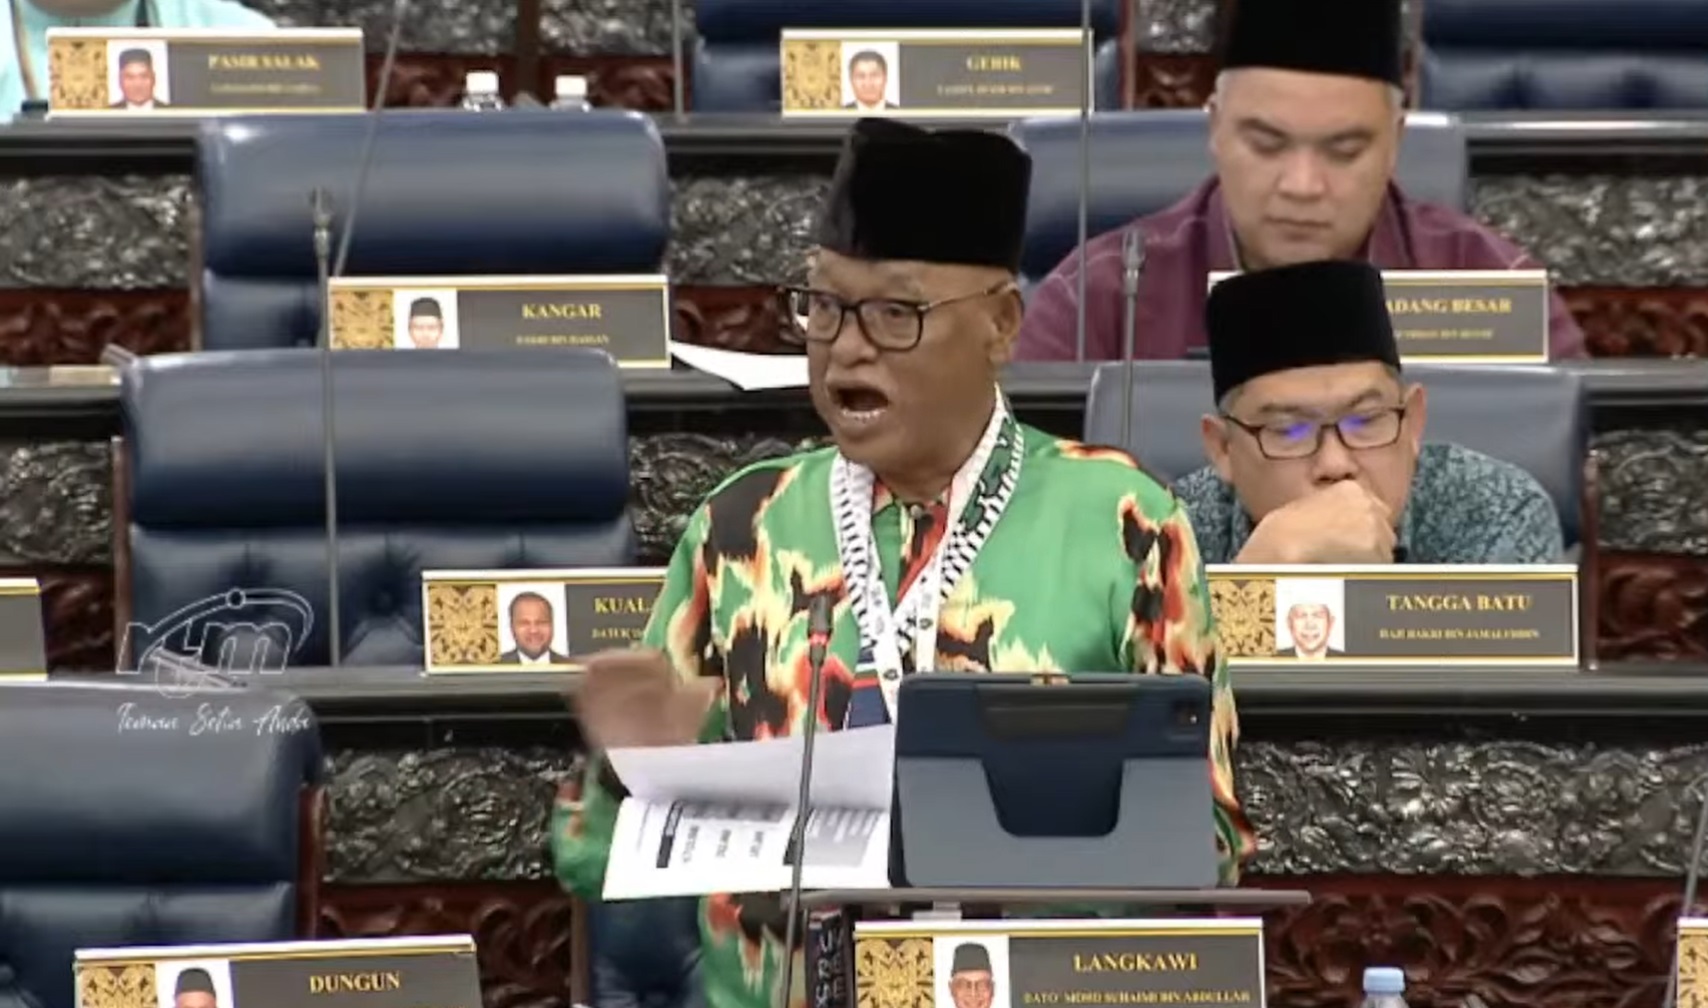 Dewan in uproar after MP tells Teresa Kok, ‘you can come to Langkawi without wearing anything’